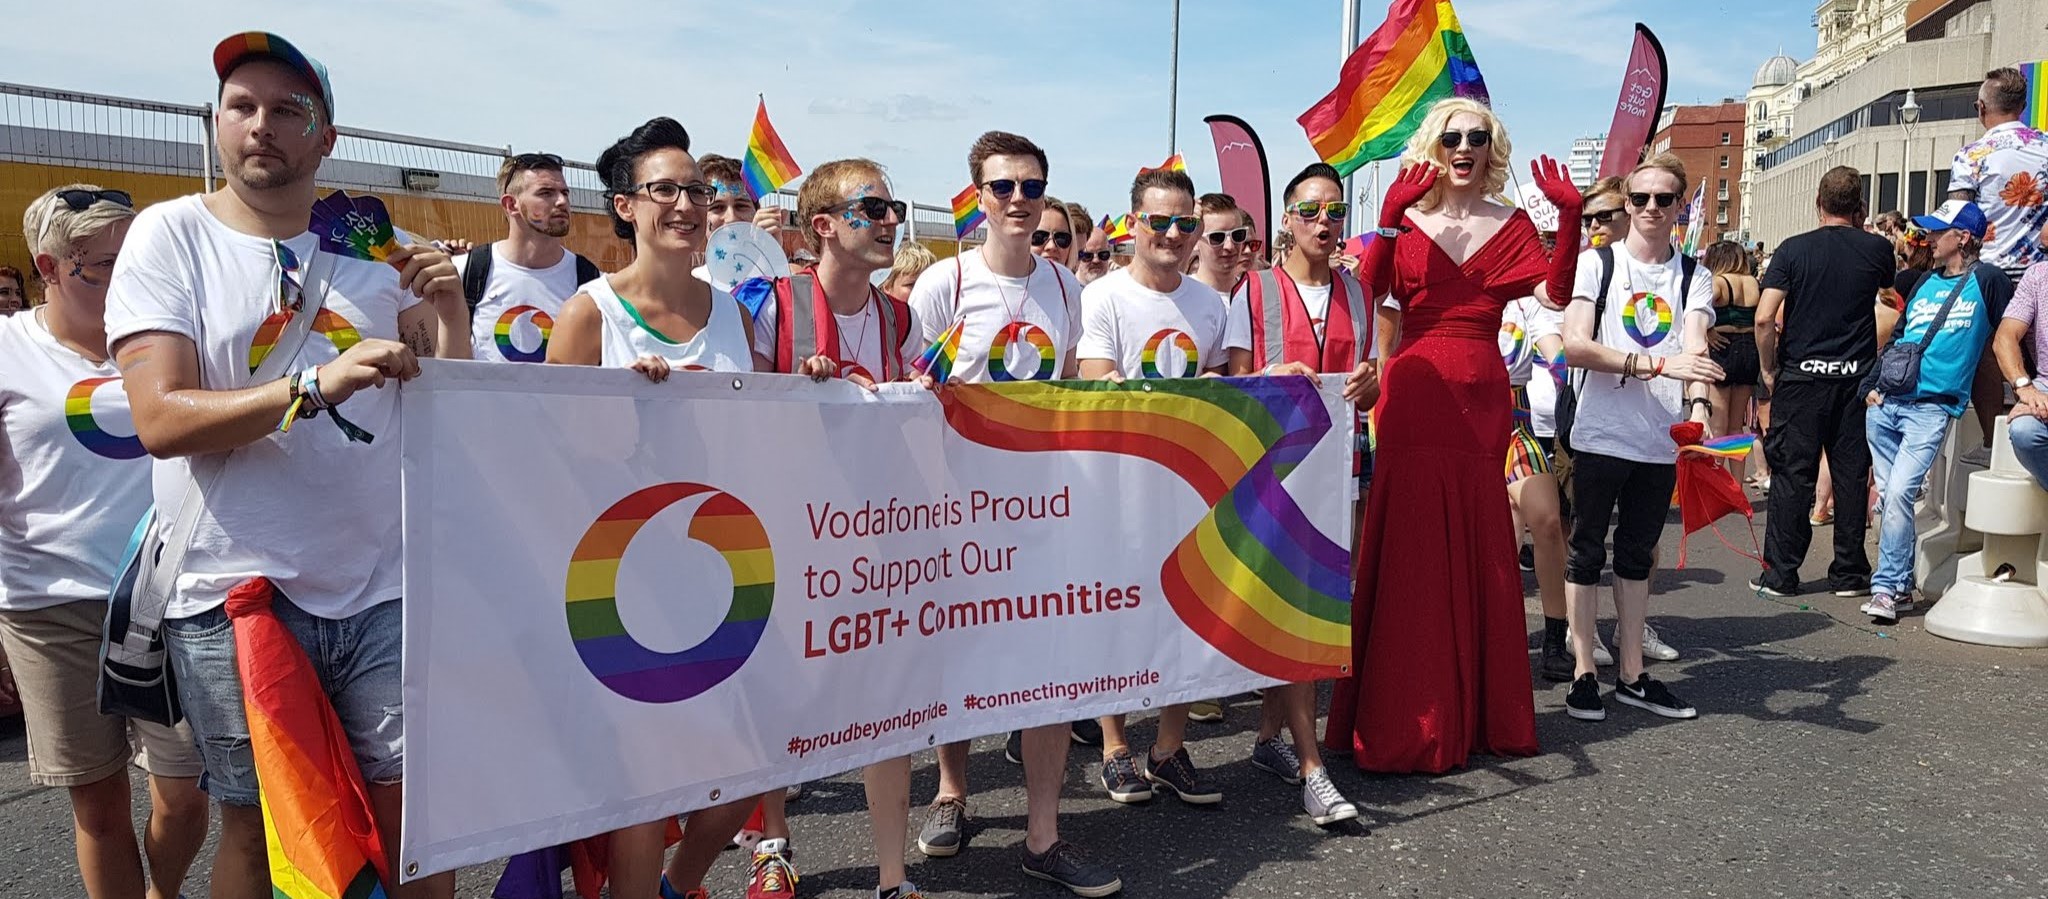 Why Pride Matters - or at least, why it matters to me